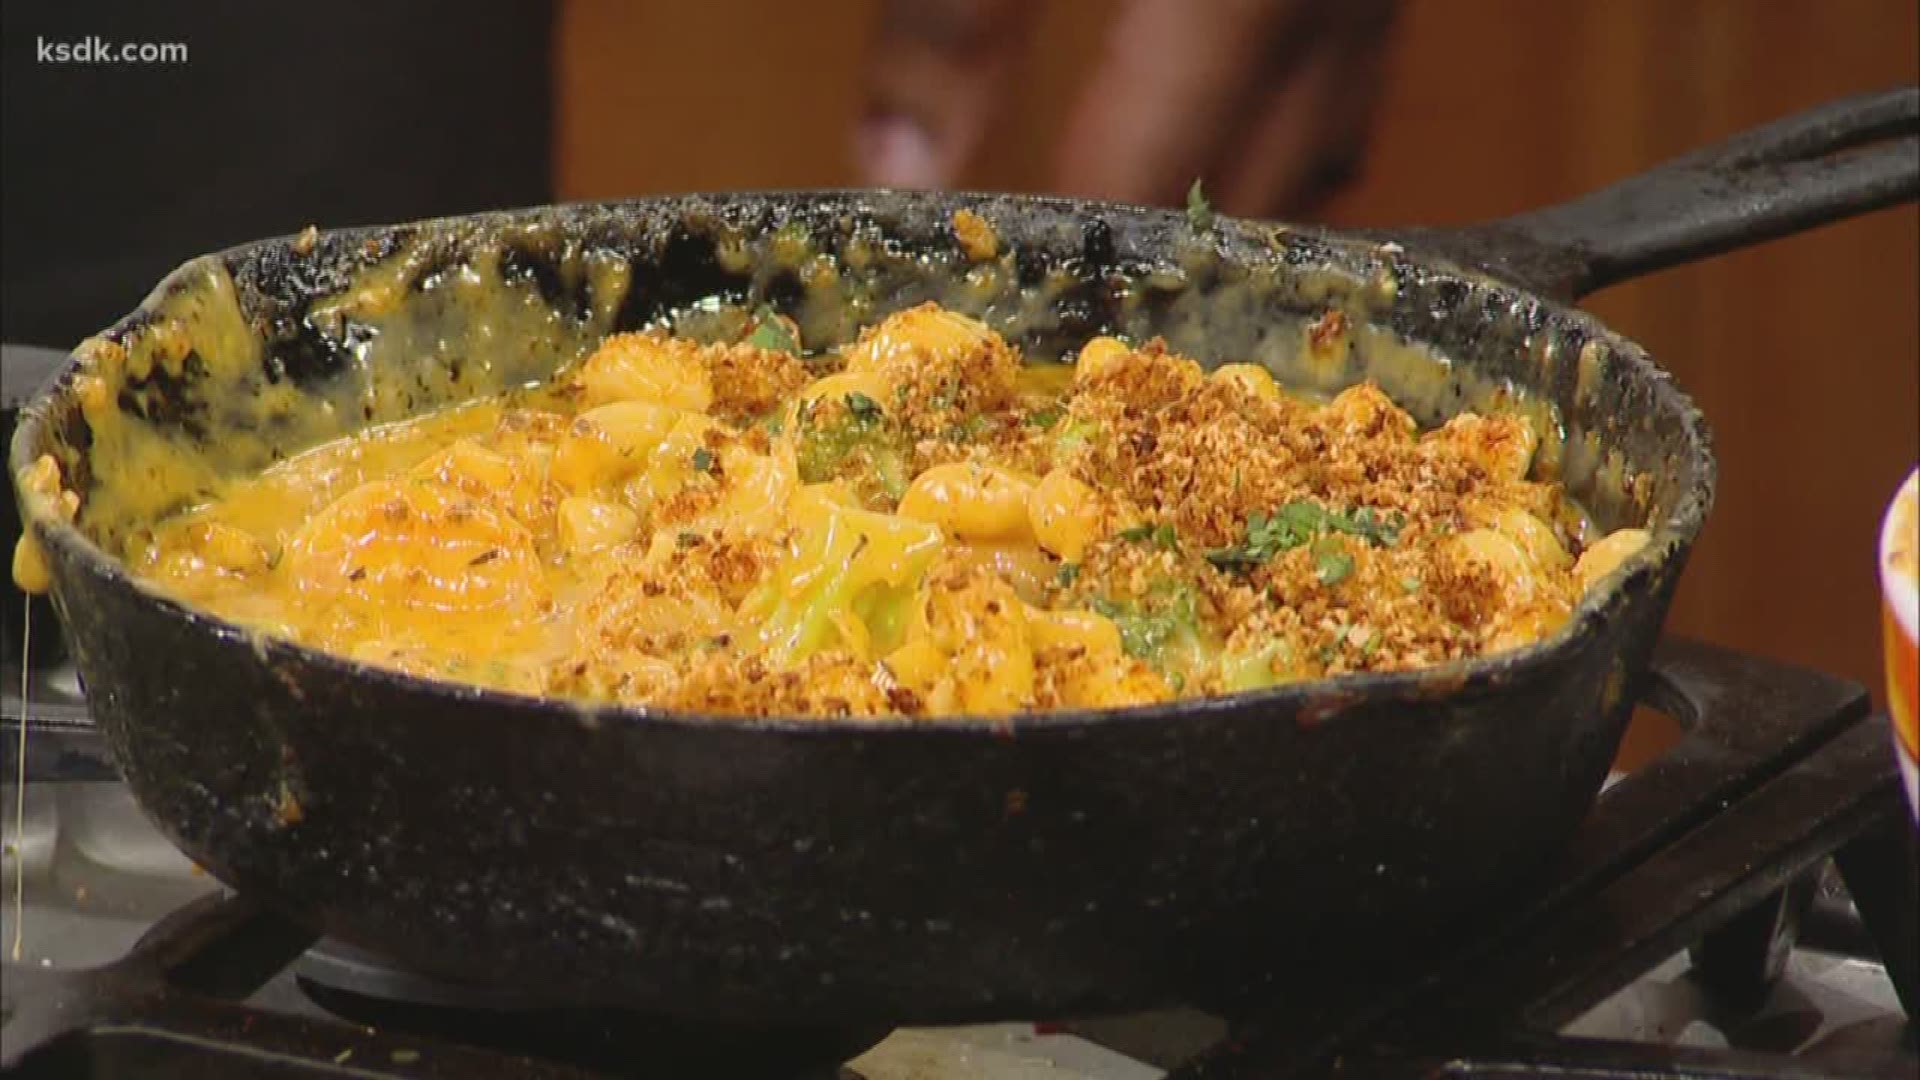 Gourmet by Chef Jay stopped by with a delicious recipe for Cajun Seafood Mac ‘n’ Cheese.